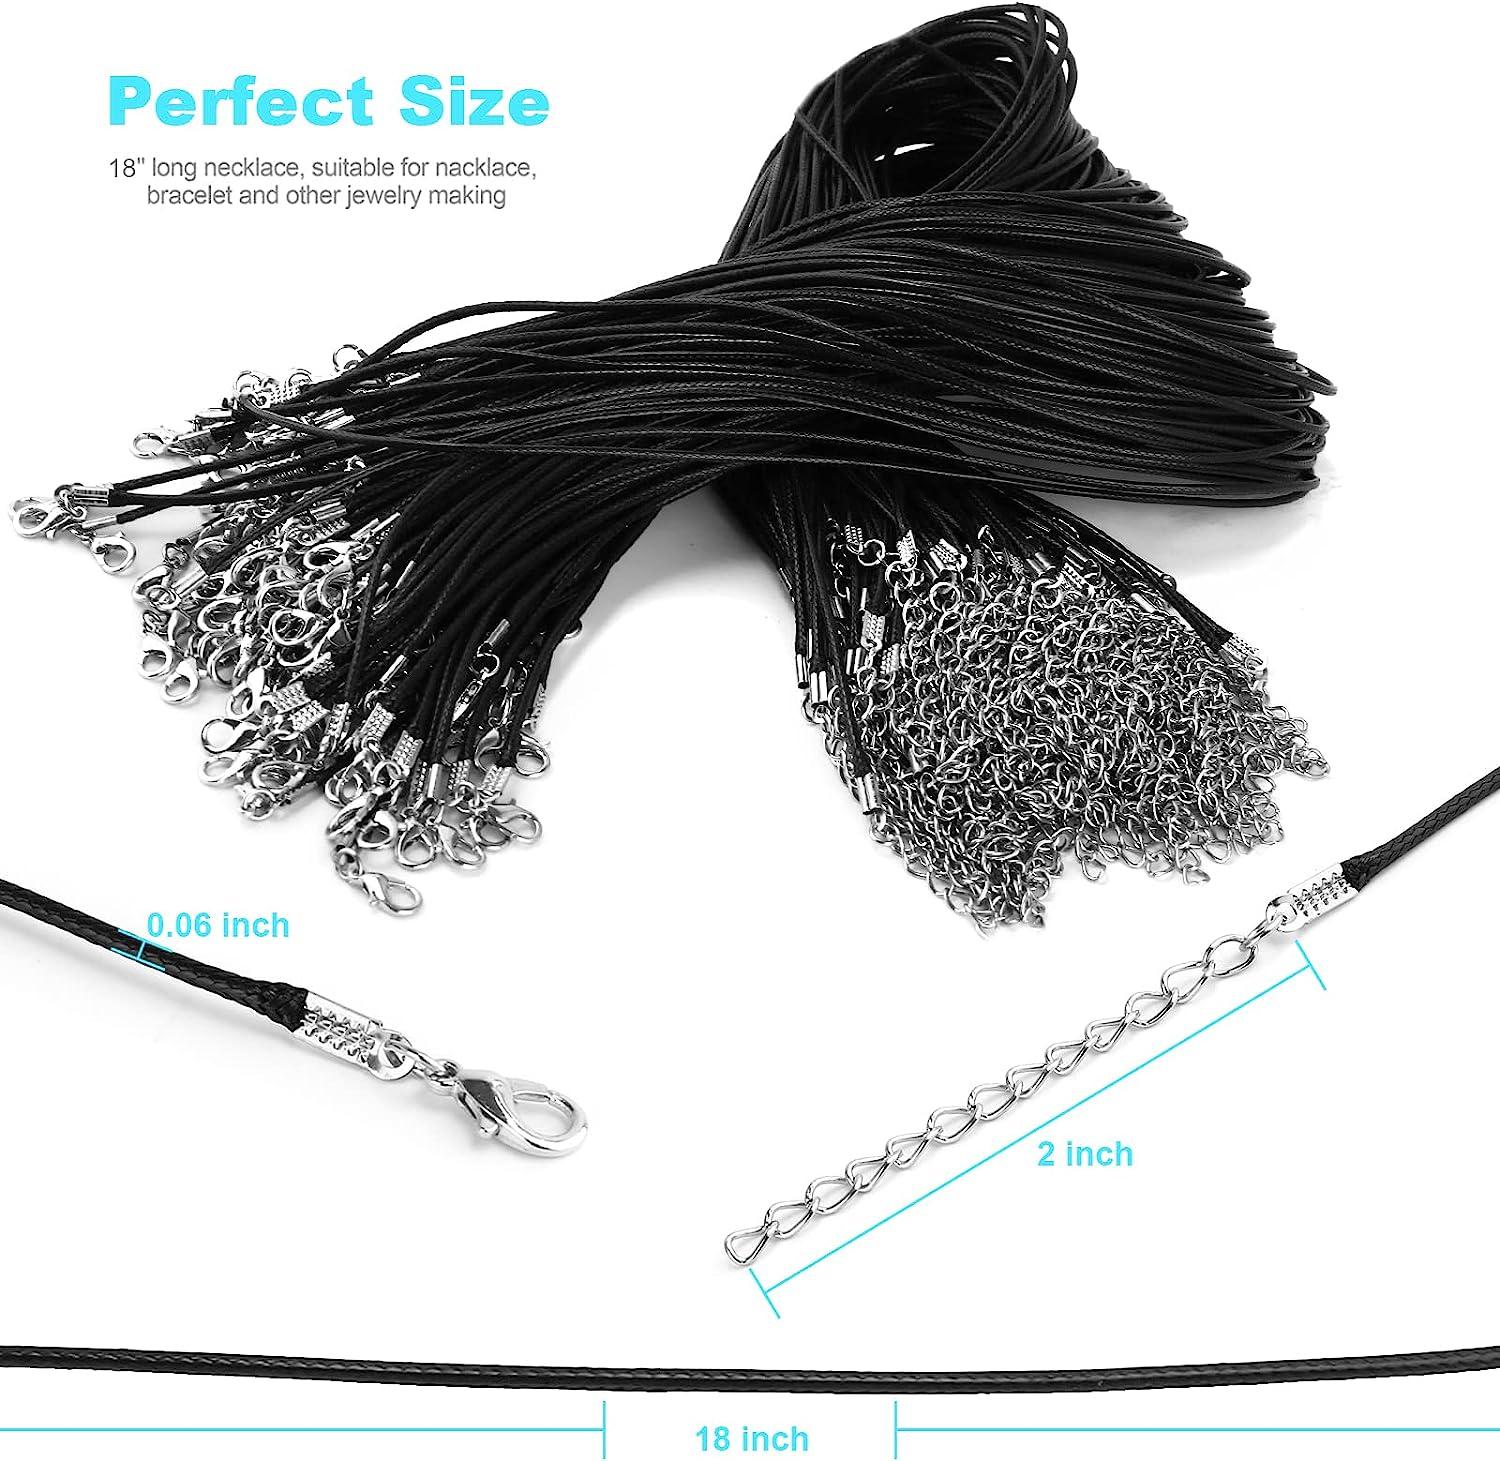 100Pcs Leather Necklace Cord with Clasps, Rope Necklace String, Black Necklace  Cords for Pendants, 18Premium Bulk Necklace Chains for Jewelry Making  Supplies, 1.5mm Waxed Necklace Bracelet Cord DHOOZ 18 inches Black